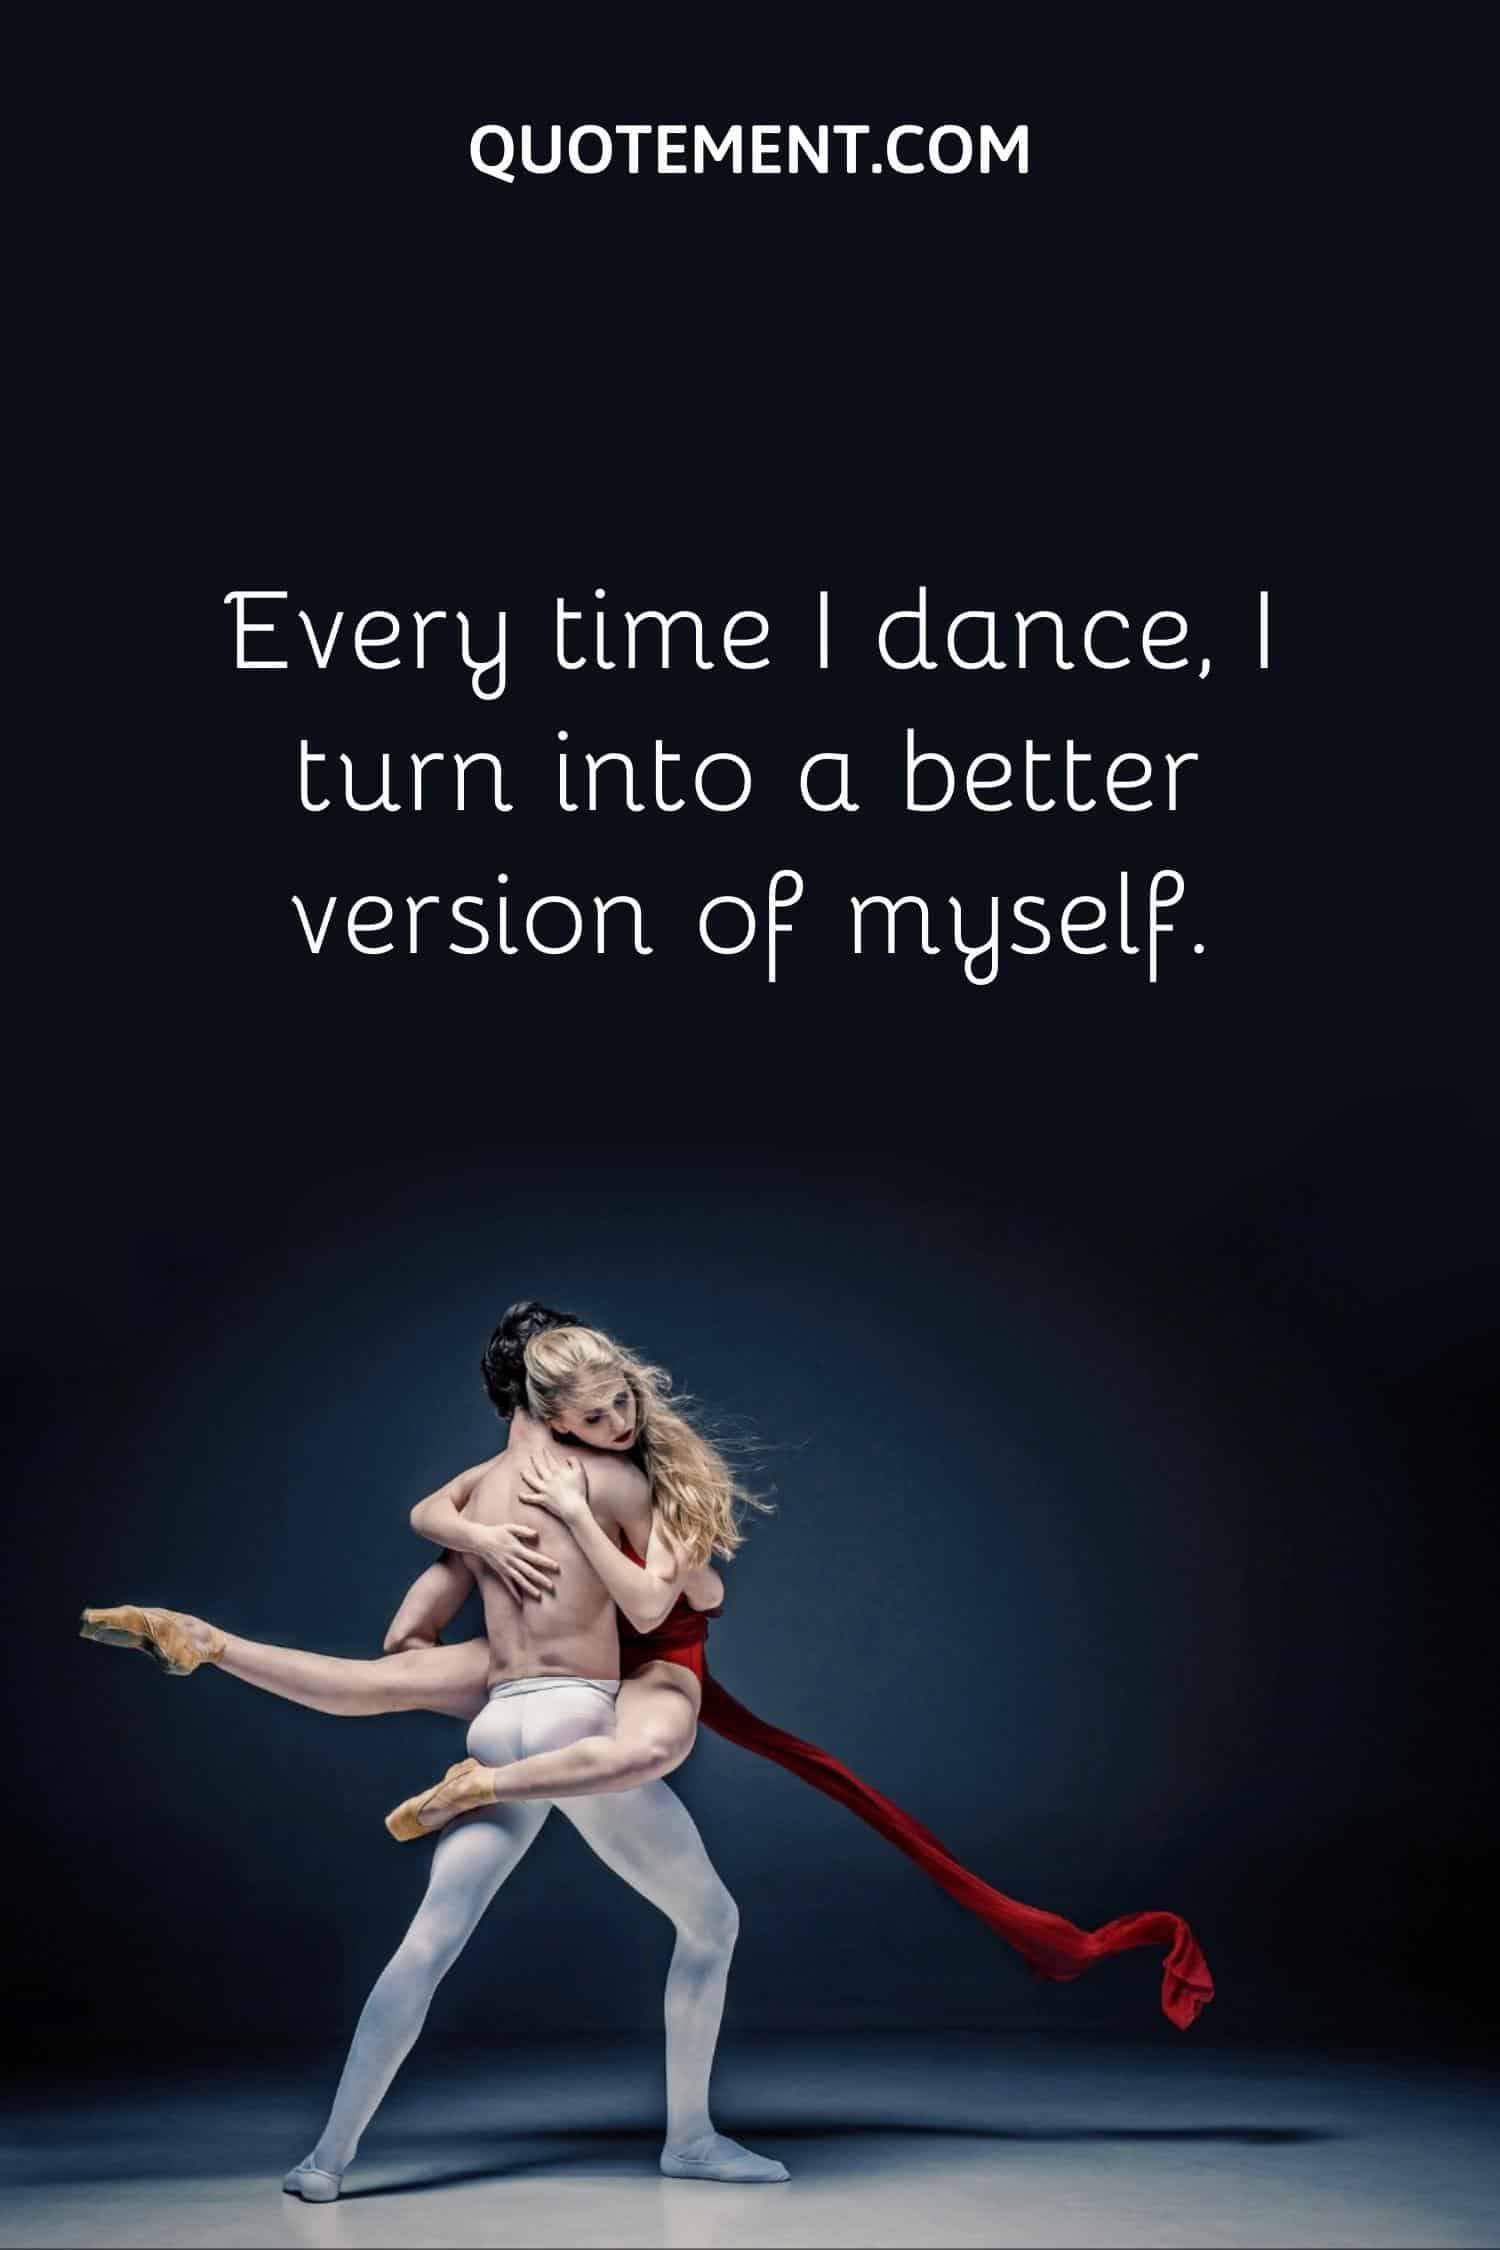 Every time I dance, I turn into a better version of myself.